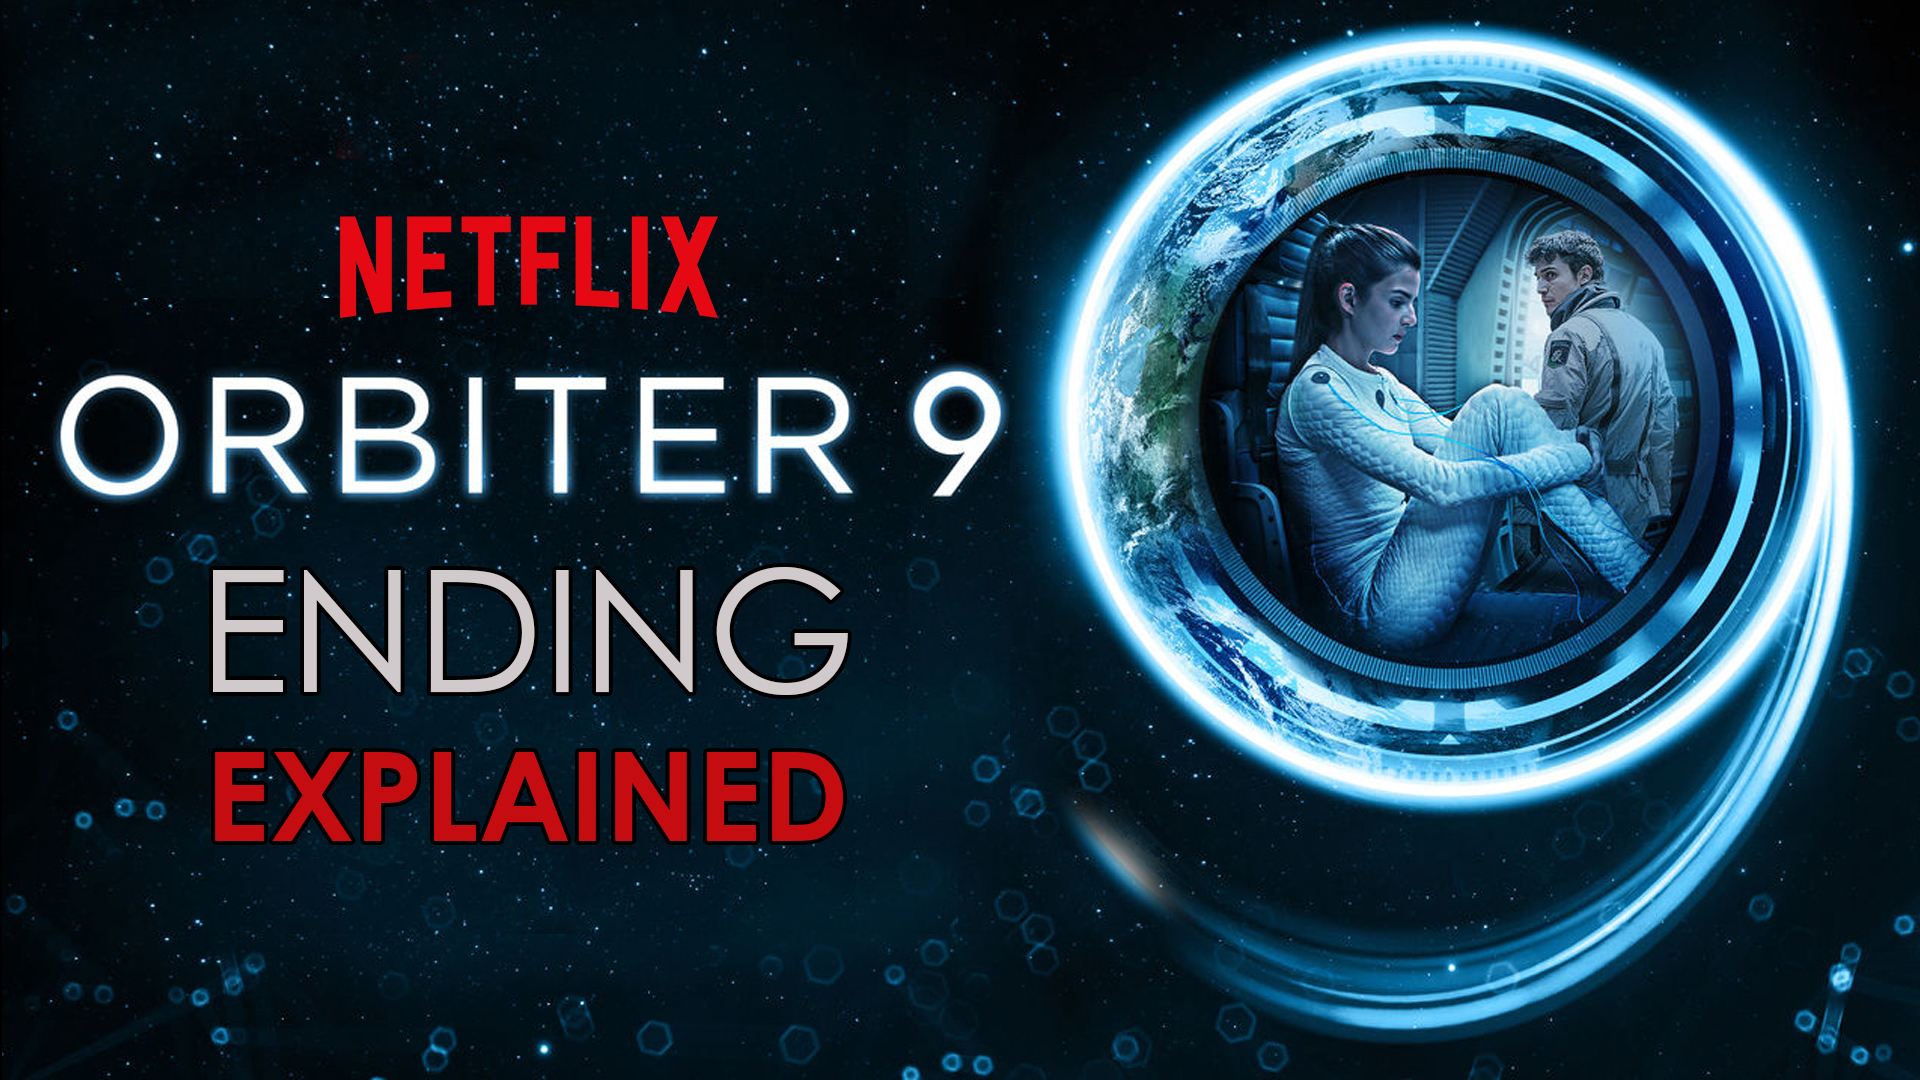 Orbiter 9 Ending Explained + What the meaning of the film is in this video essay analysis netflix